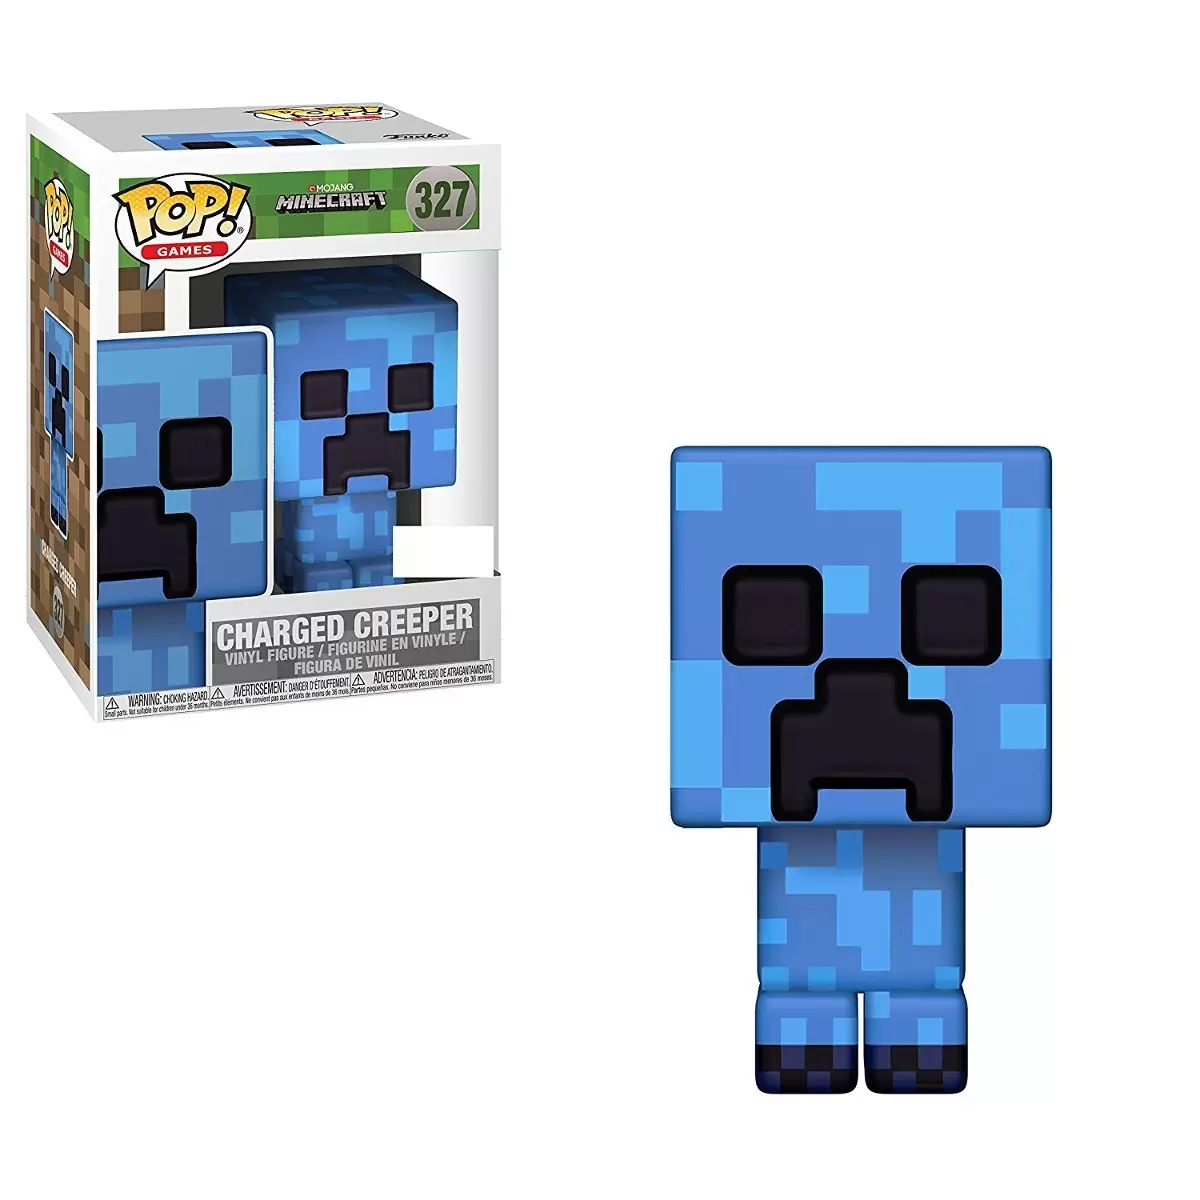 POP! Games - Minecraft - Charged Creeper